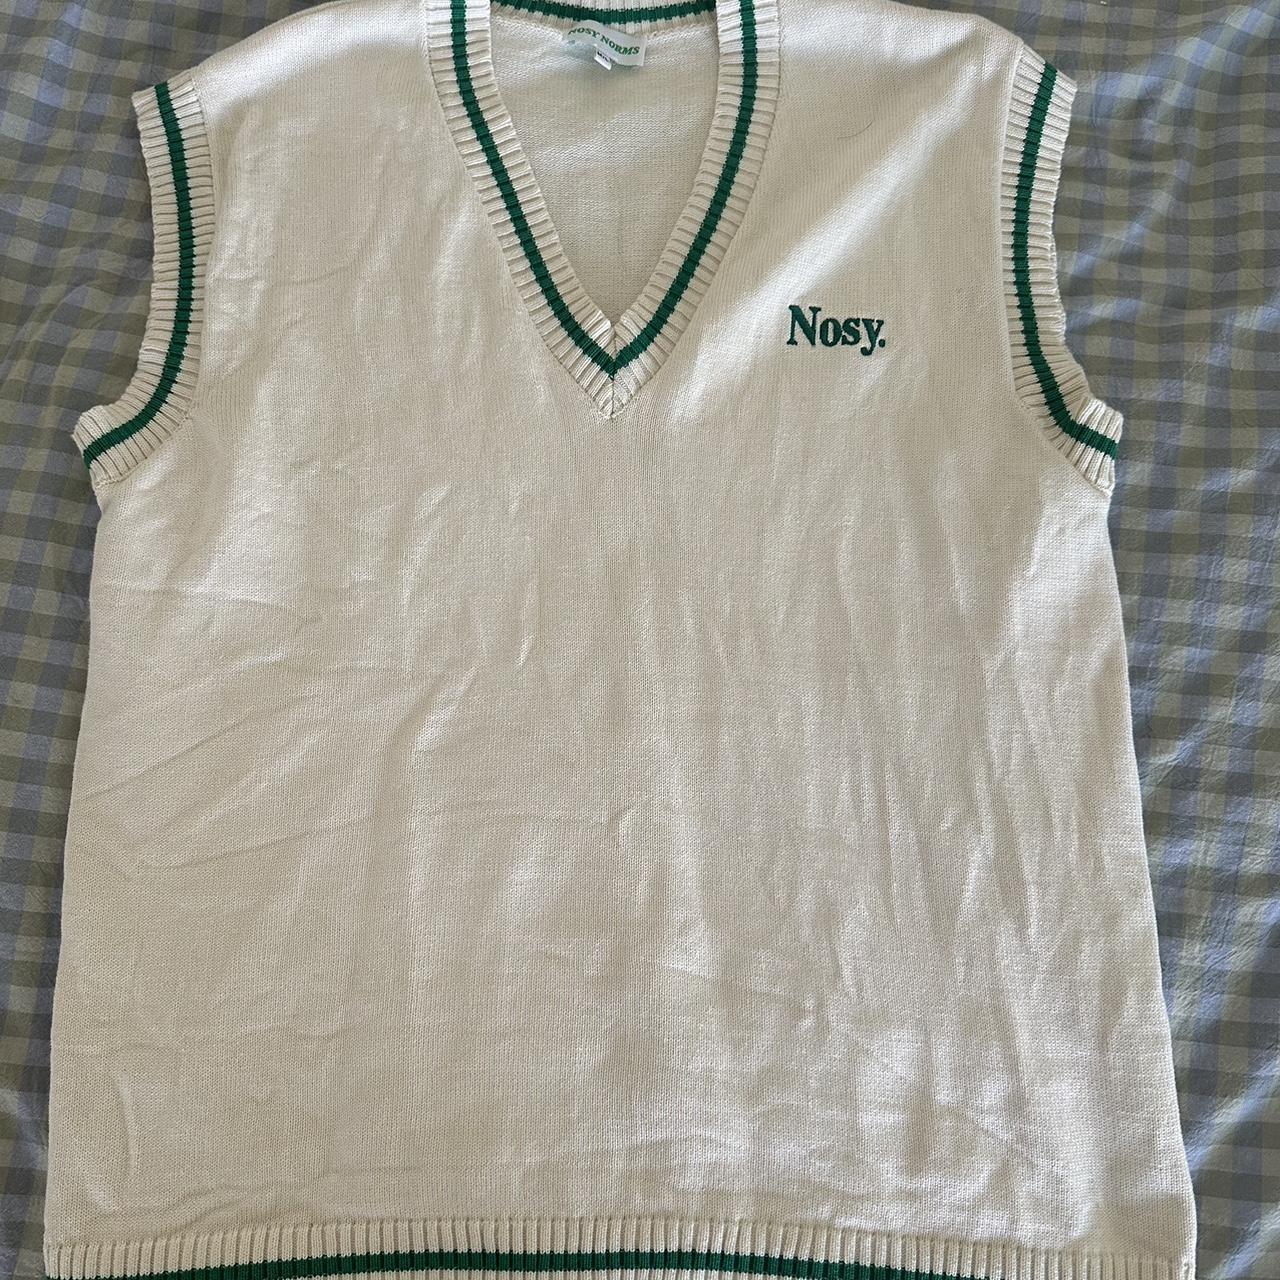 Nosy Norms sweater vest - worn 2 times like new,... - Depop